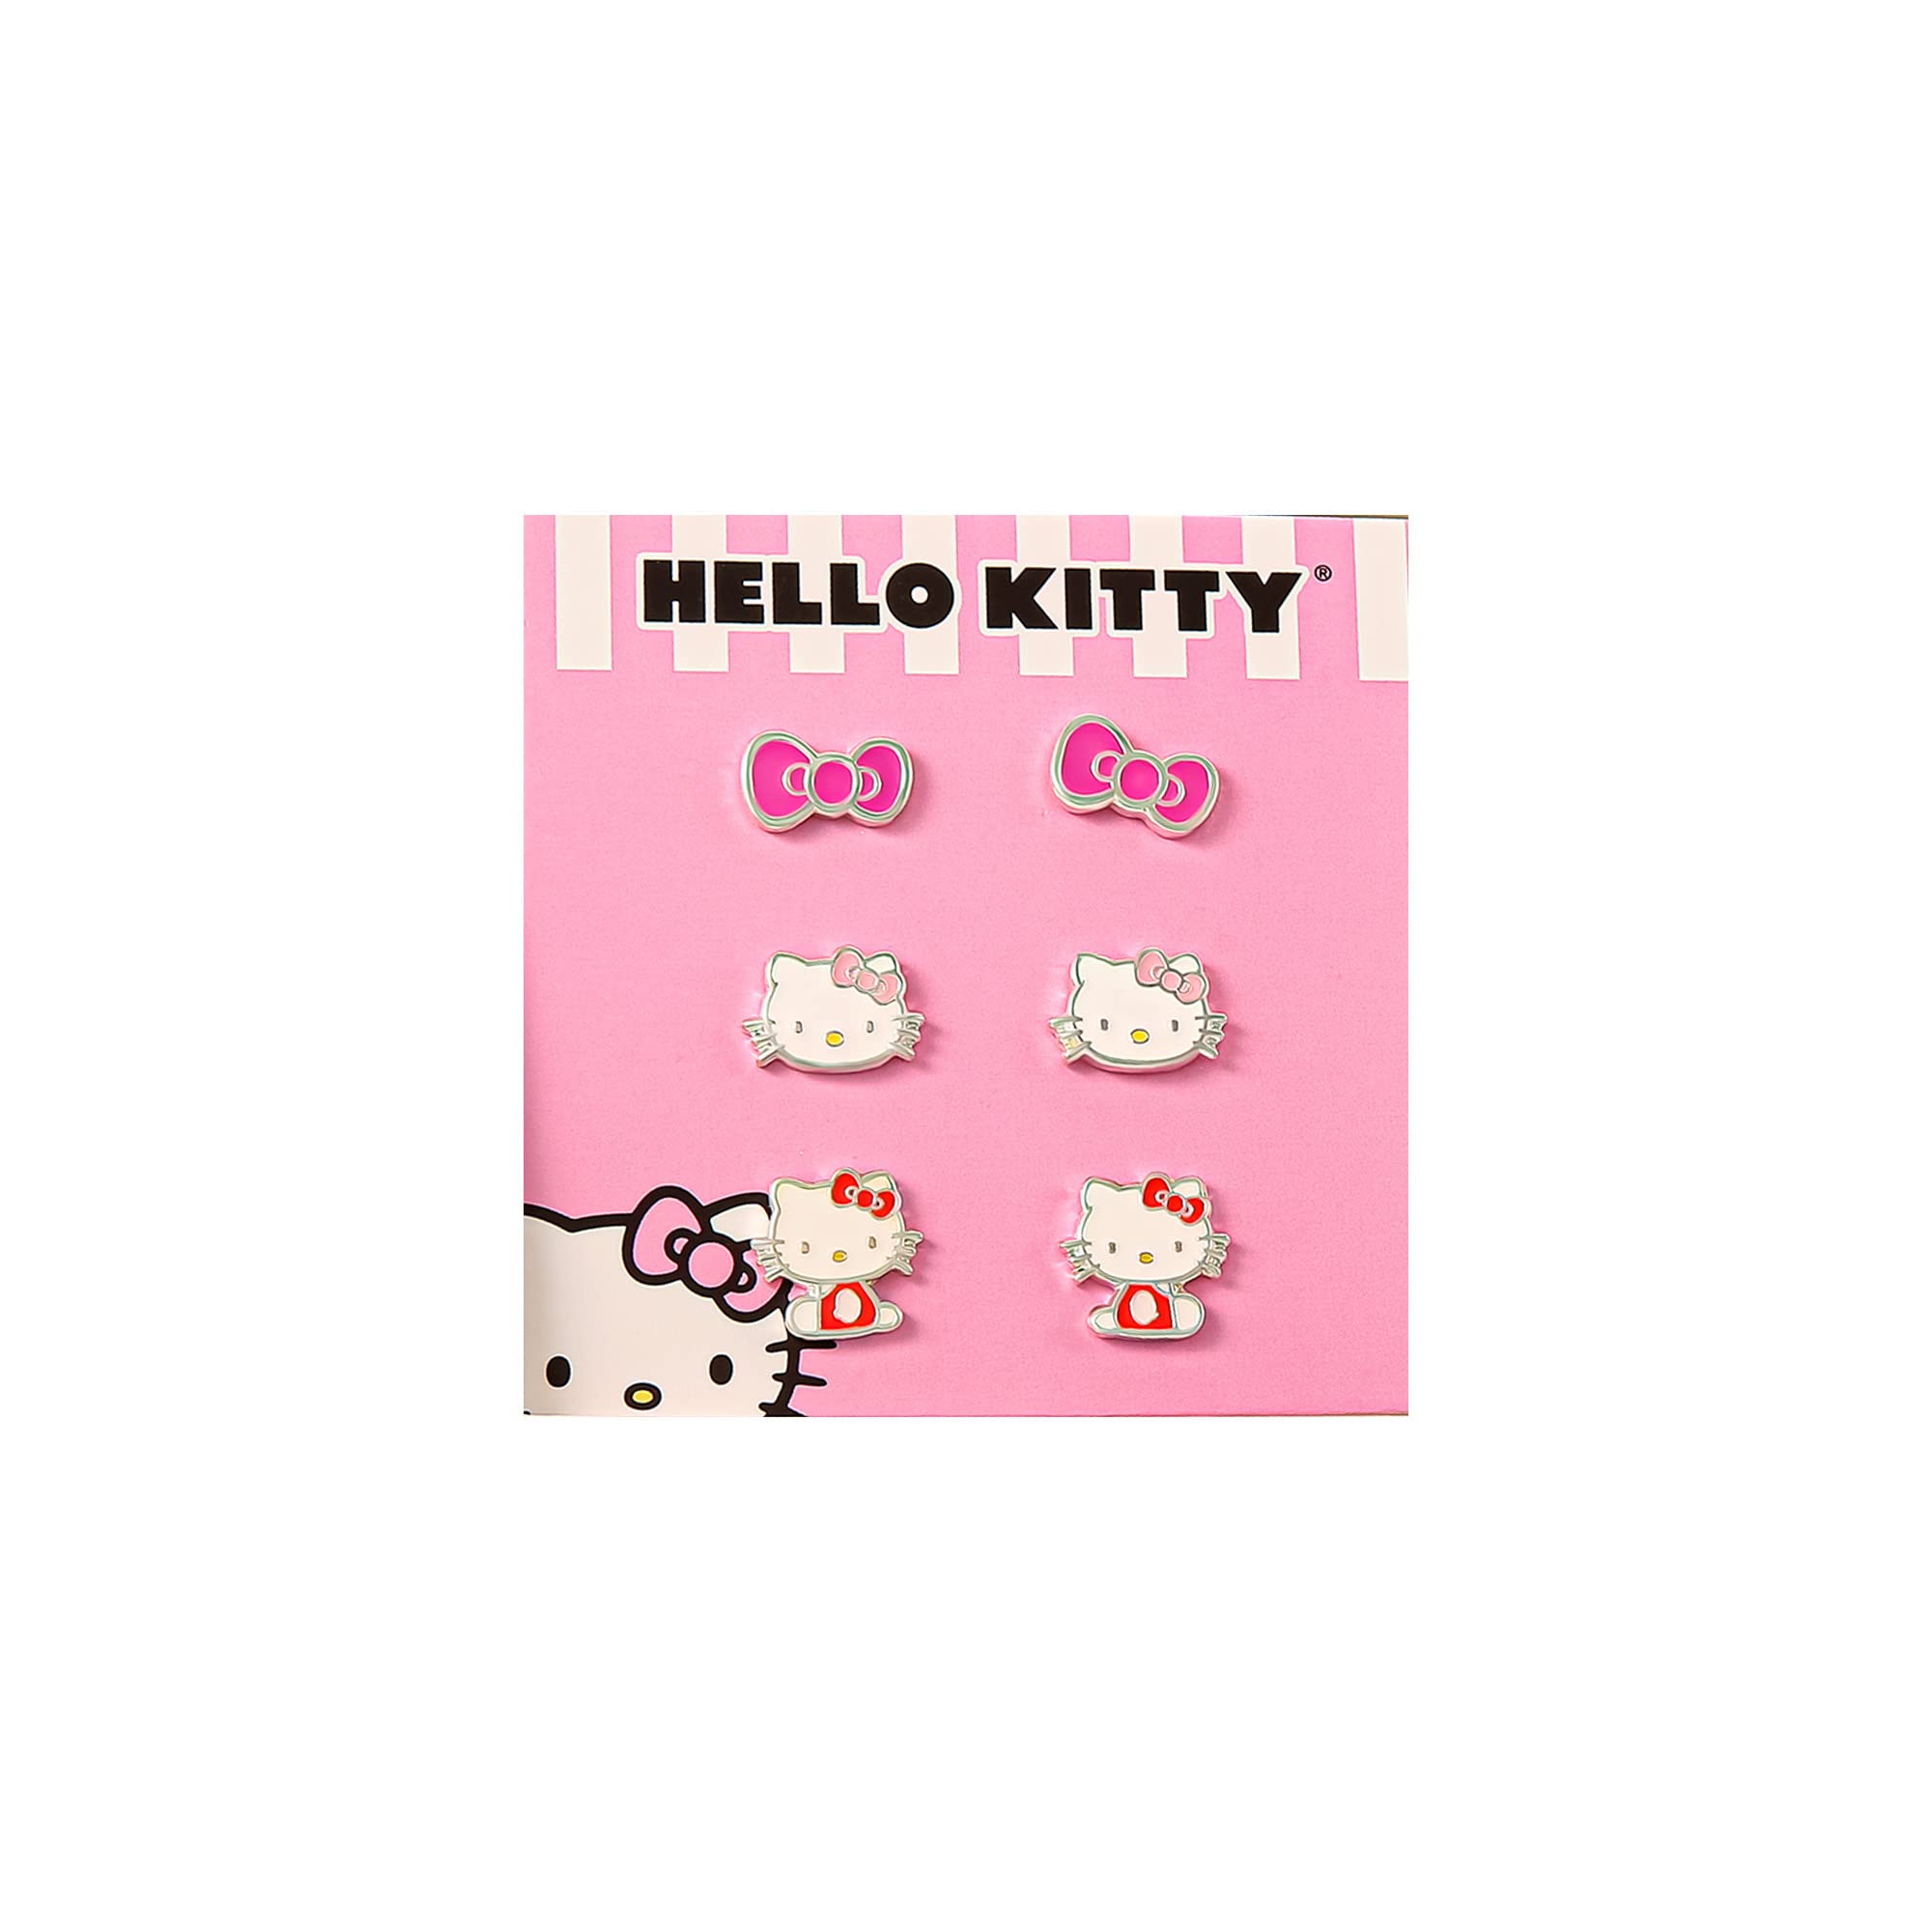 Sanrio Hello Kitty Stud Earrings Set 3-Piece - Silver Plated and Enamel Hello Kitty Earrings Officially Licensed